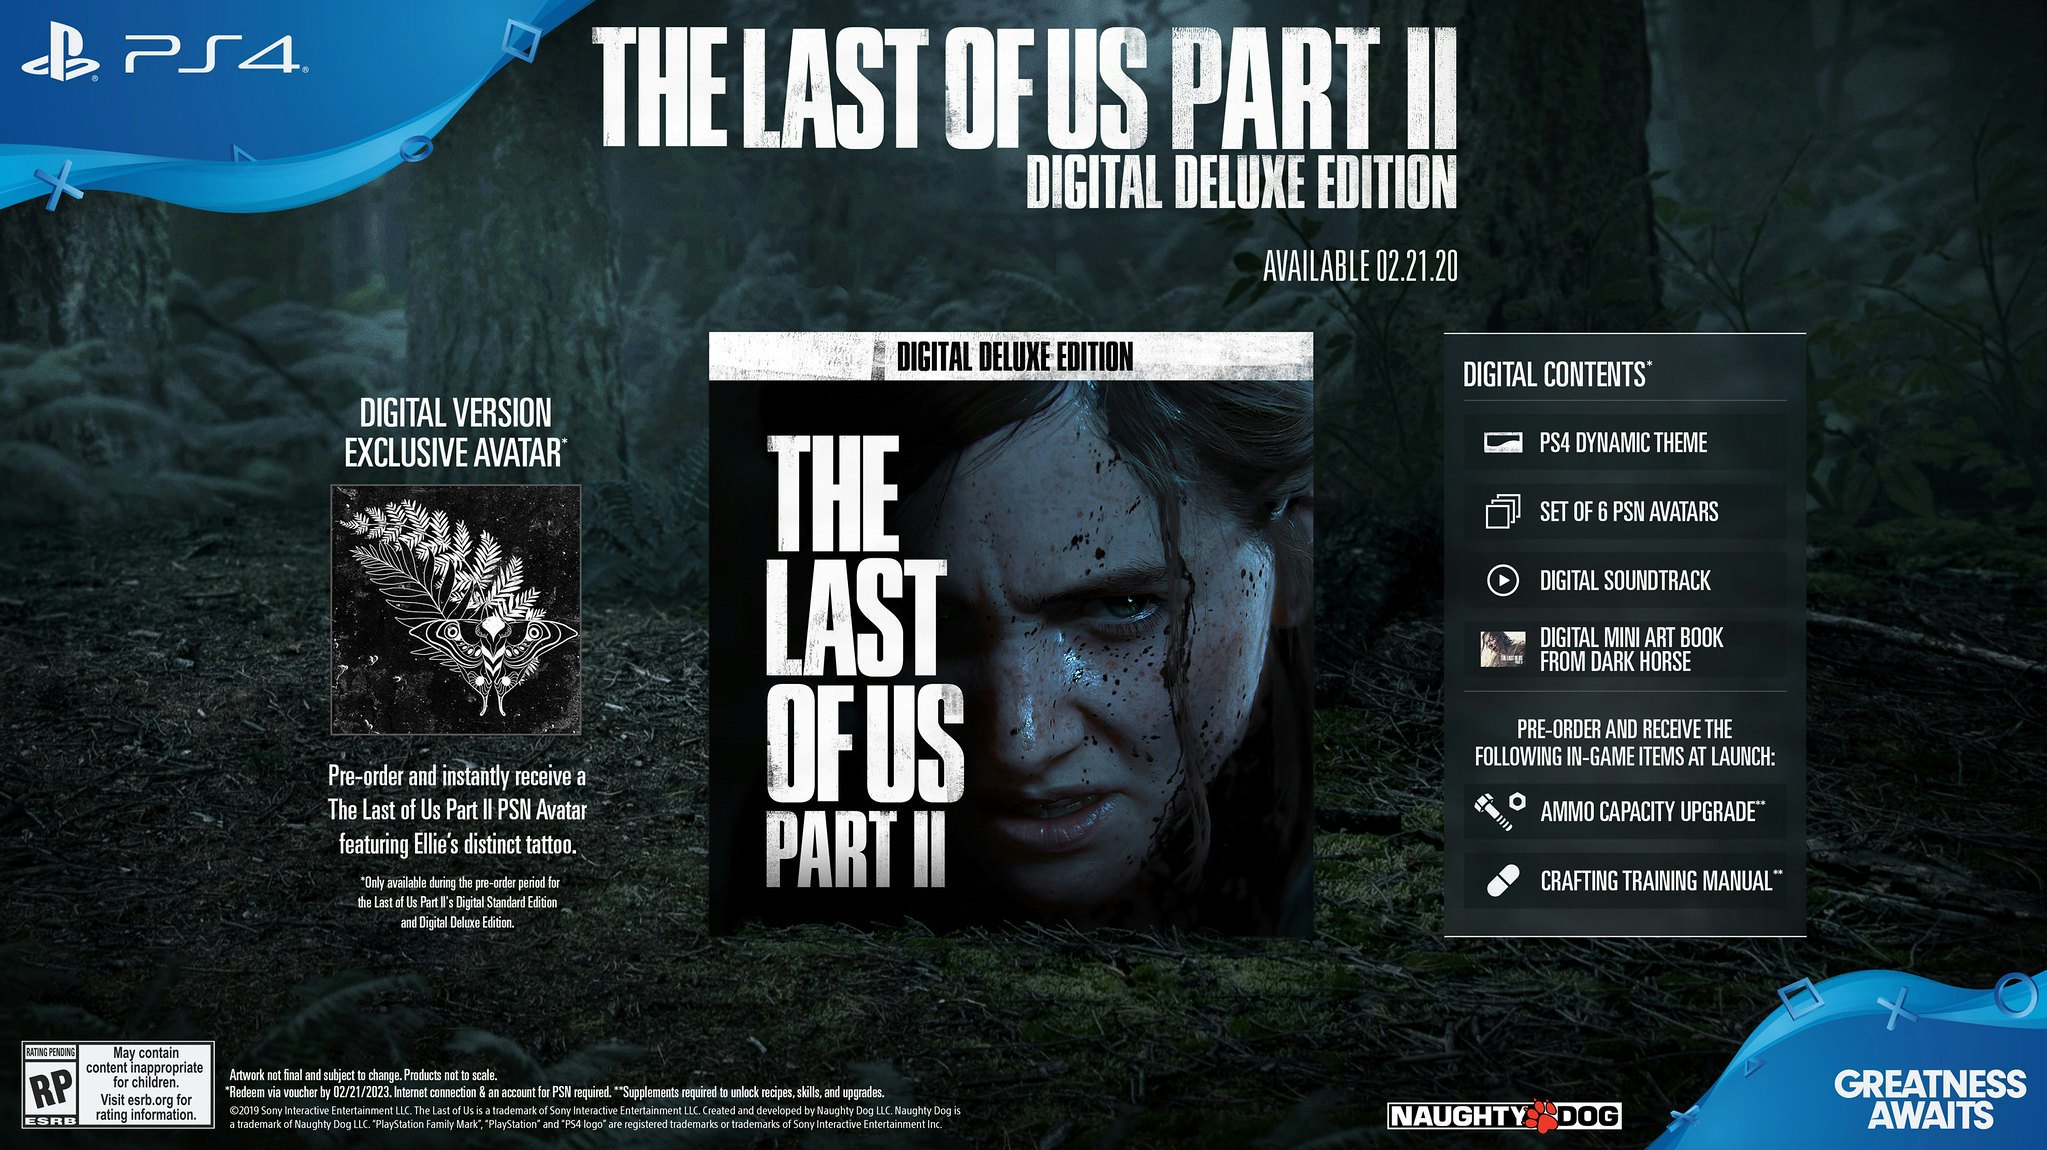 Free The Last of Us 2 PS4 Theme and Avatars for a Limited Time